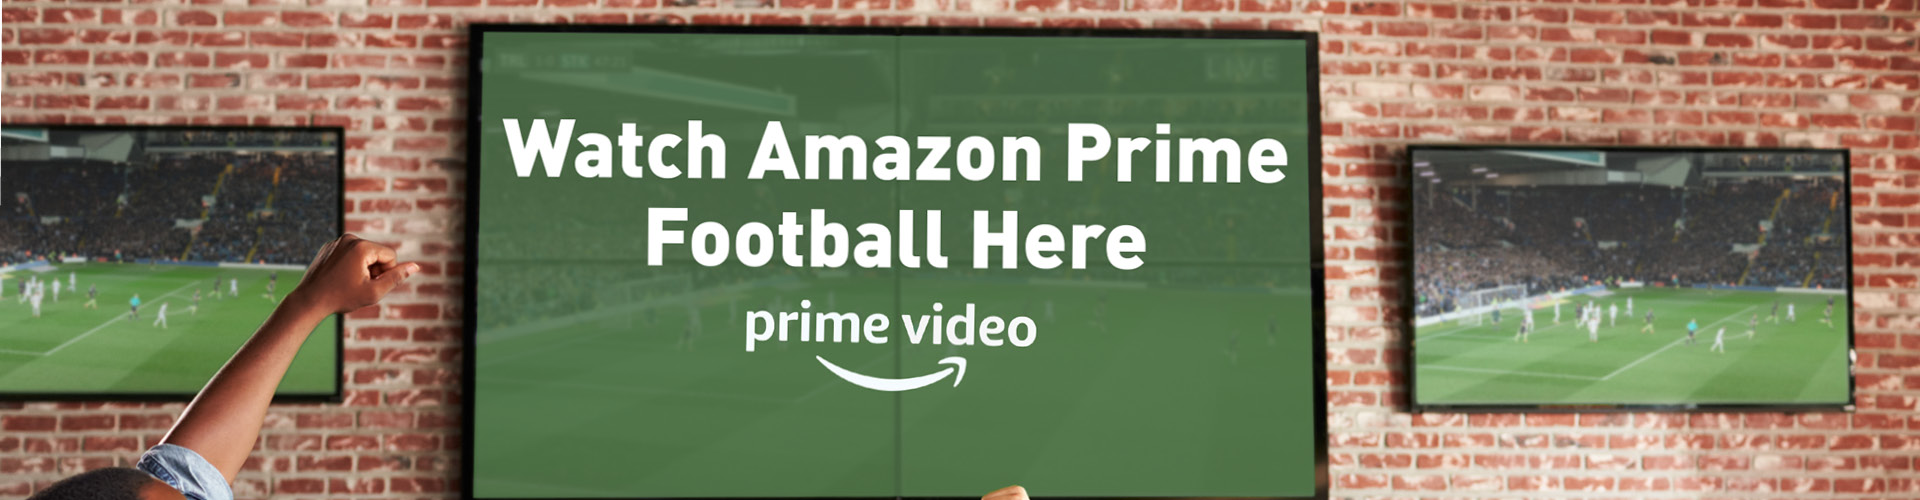 Watch Amazon Prime football at Oxnoble in Manchester